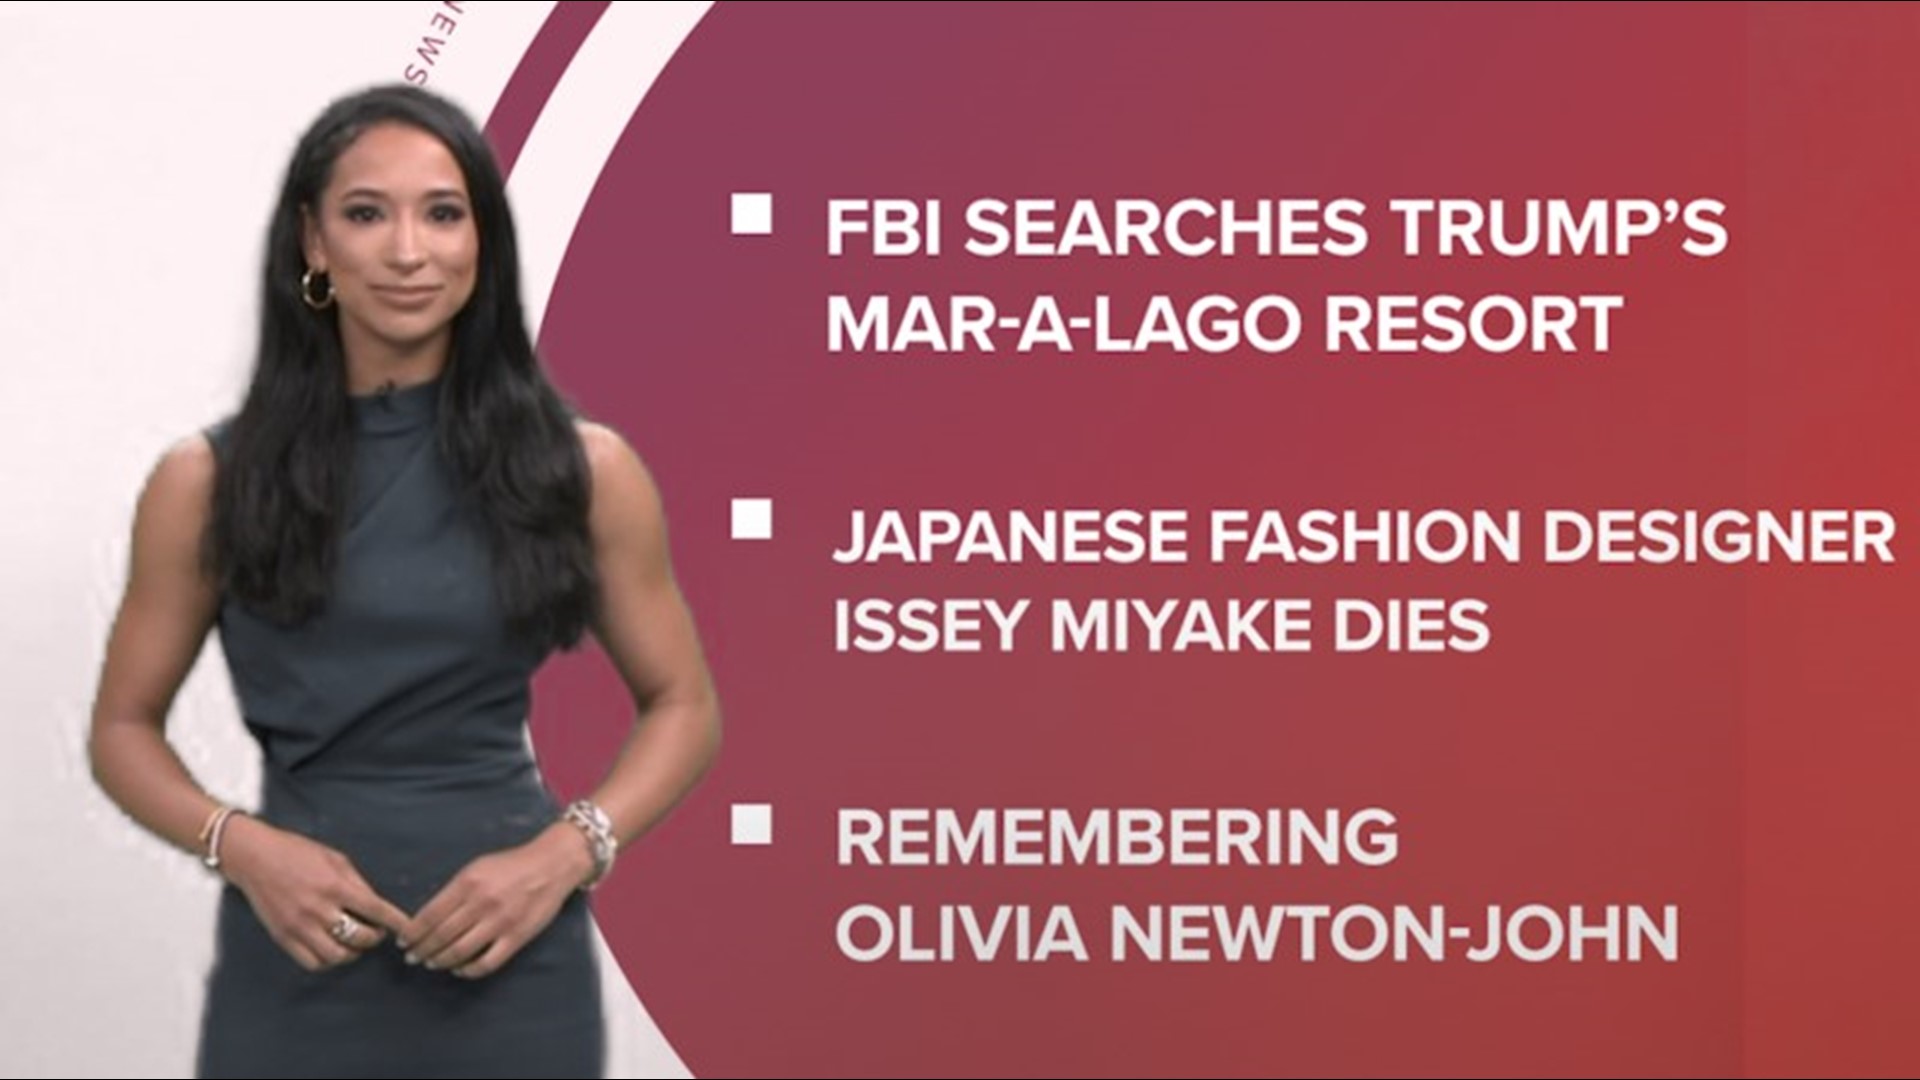 A look at what is happening in the news from the FBI searching Trump's Mar-a-lago resort to remembering Olivia Newton-John and the return of pumpkin spice.